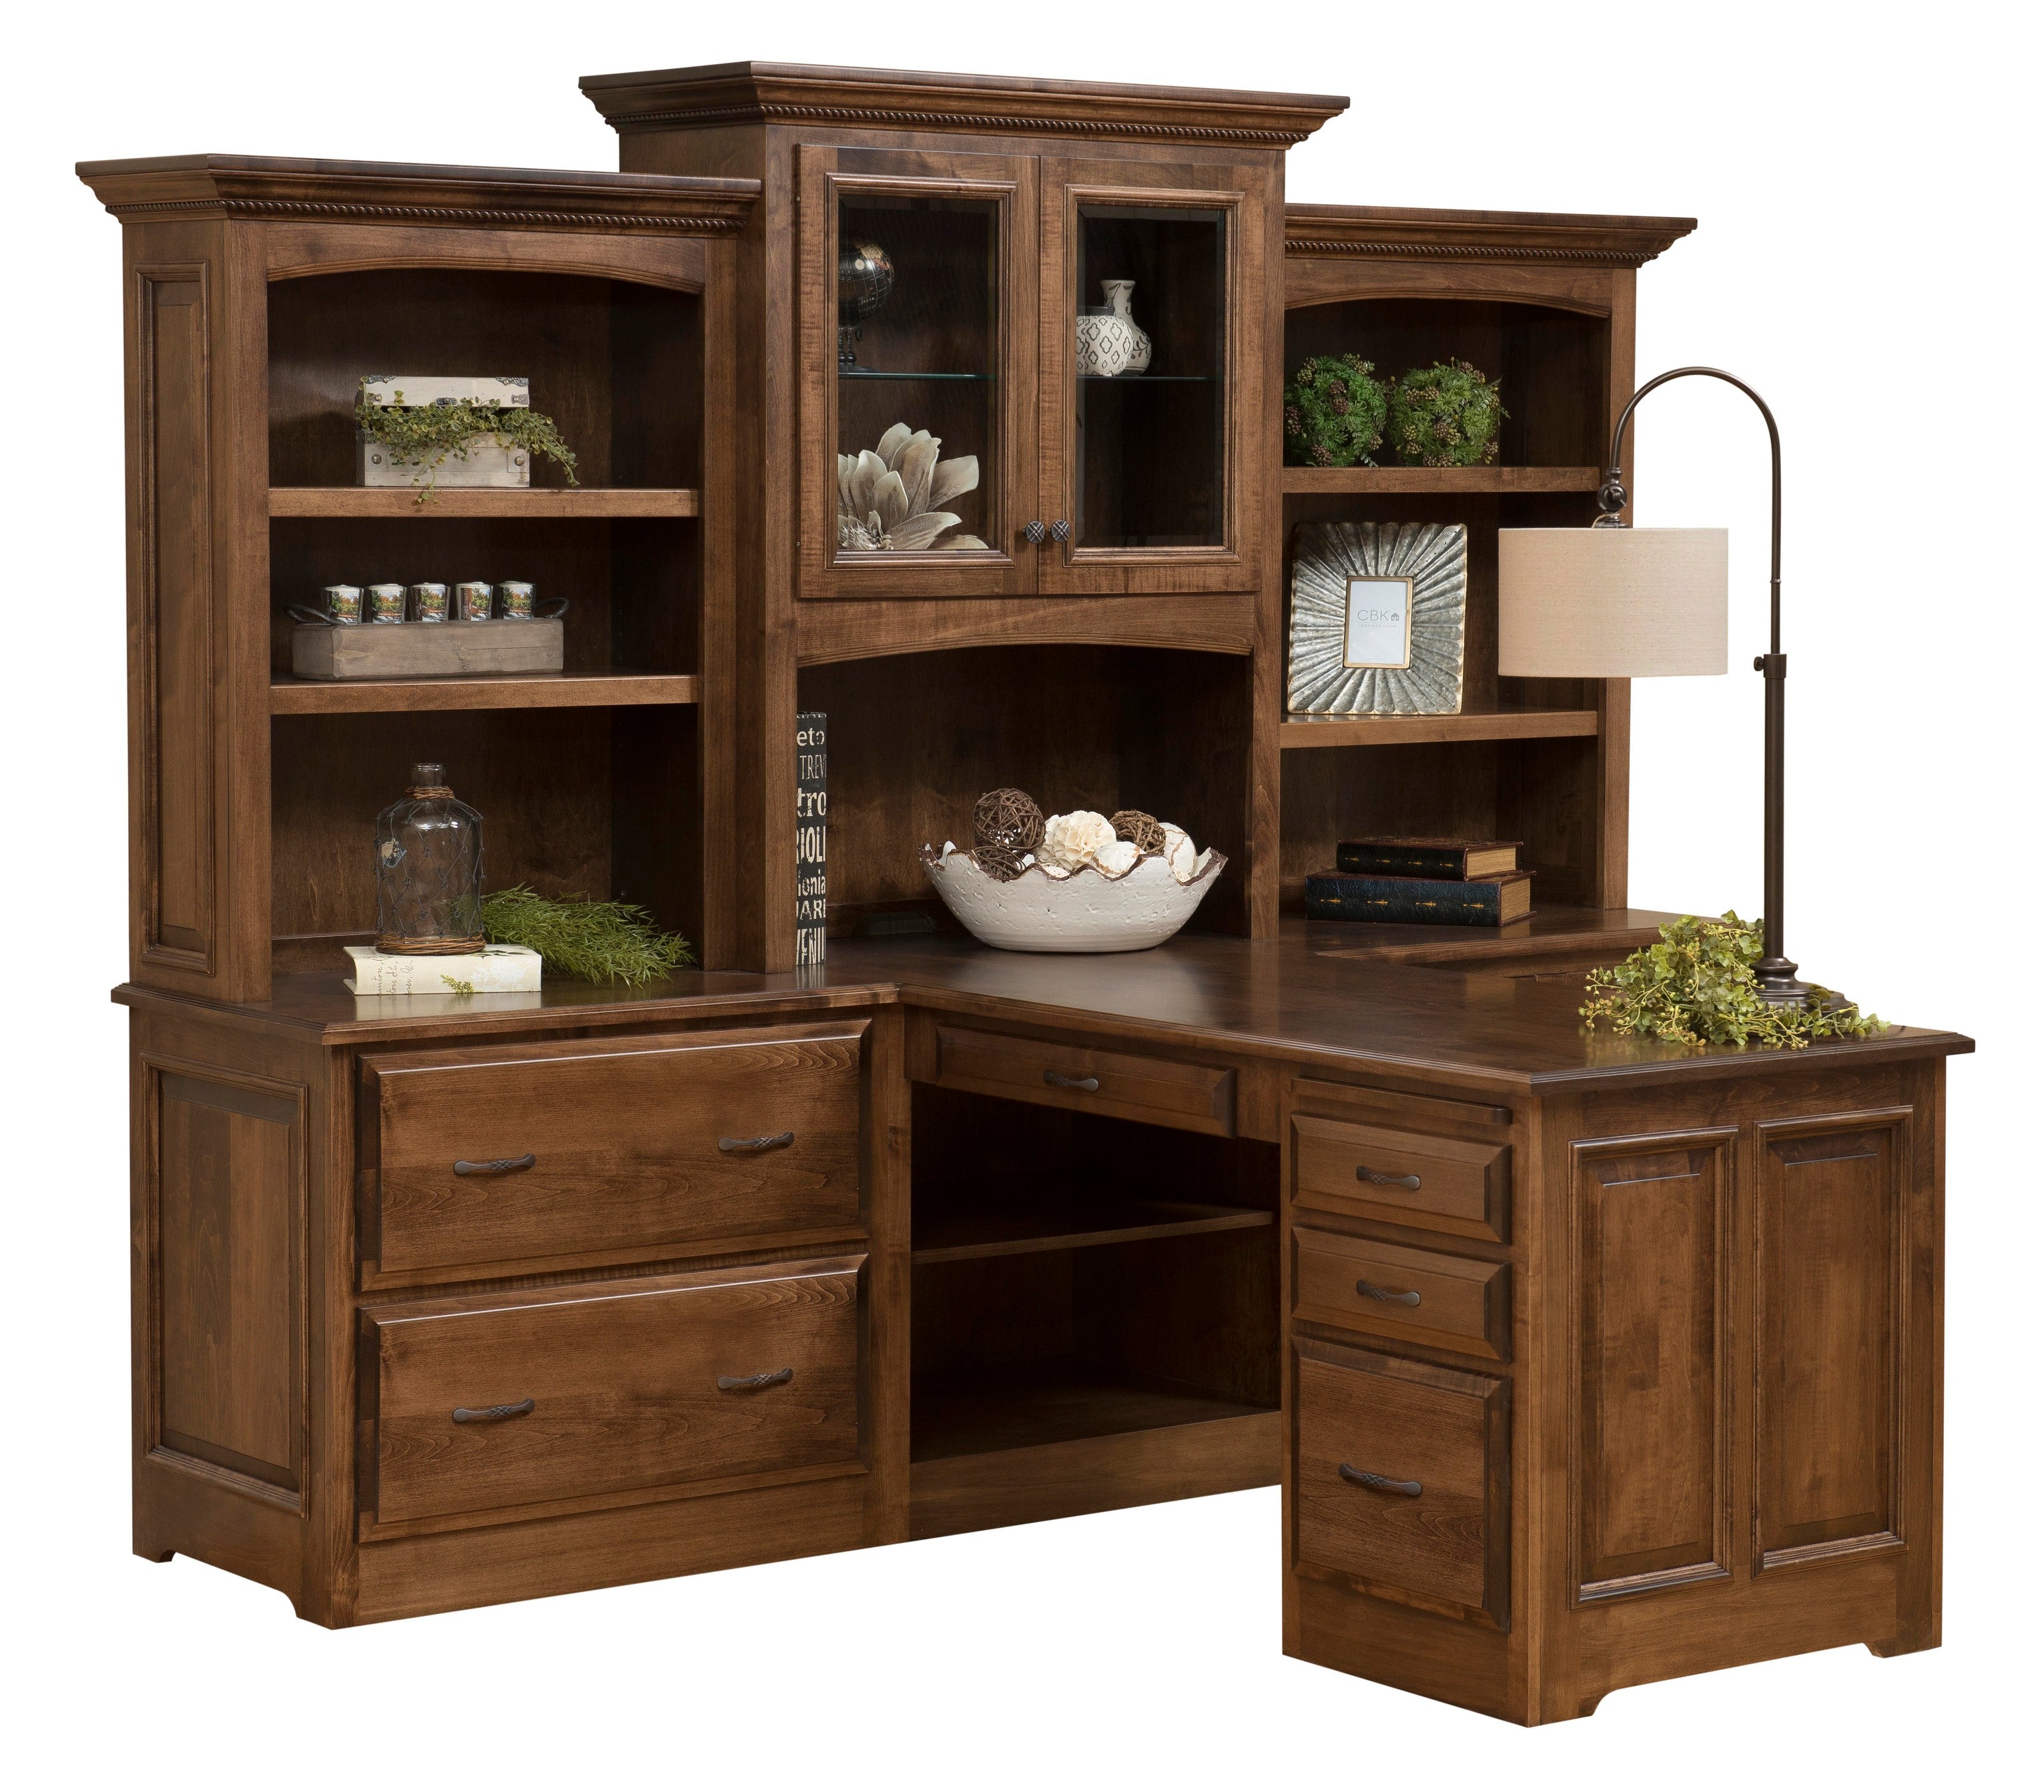 Amish Liberty Partners Desk and Three Piece Hutch